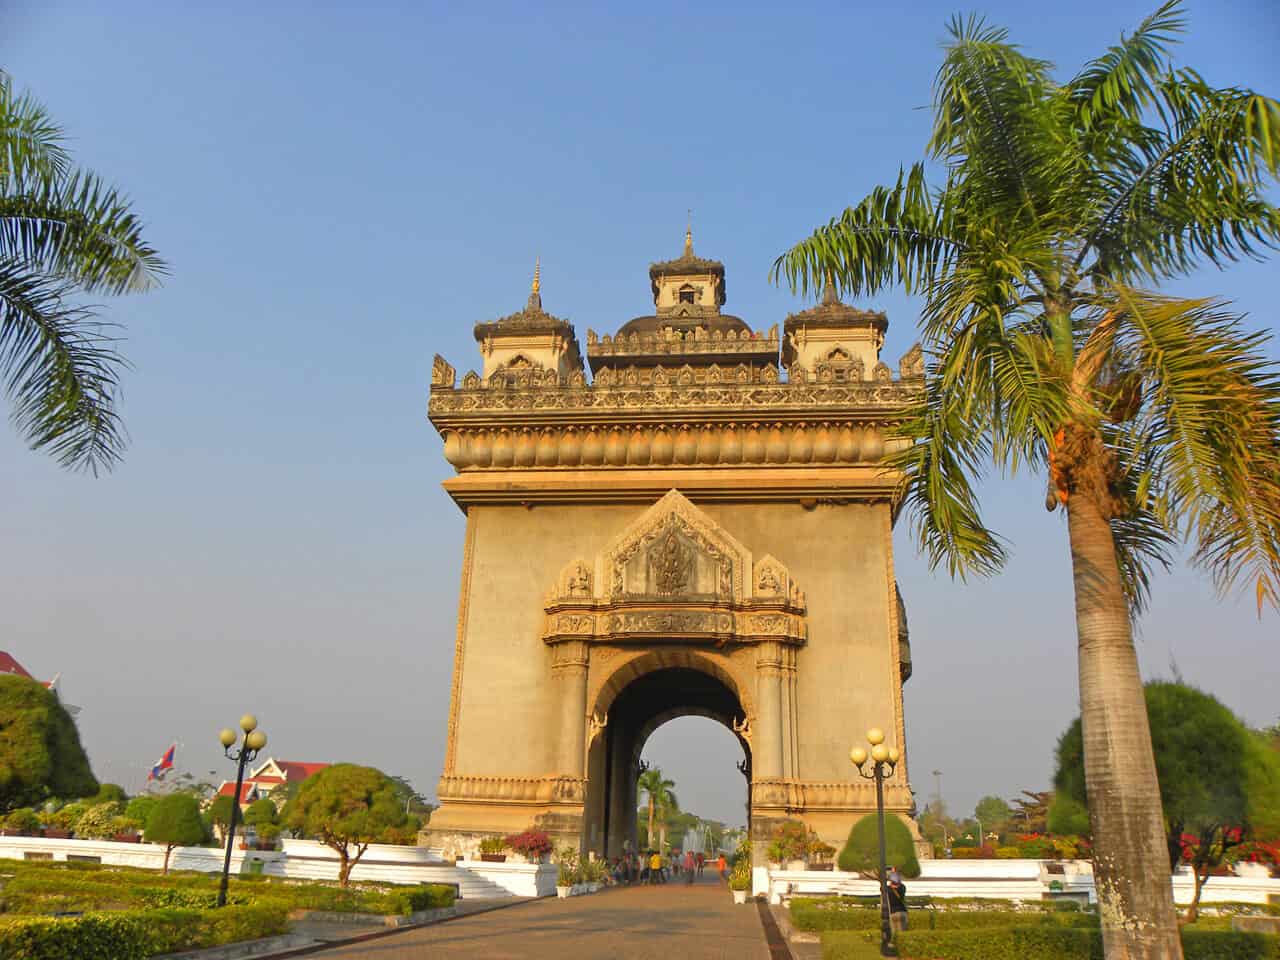 The Patuxai (“Victory Gate’) in Vientiane, Laos